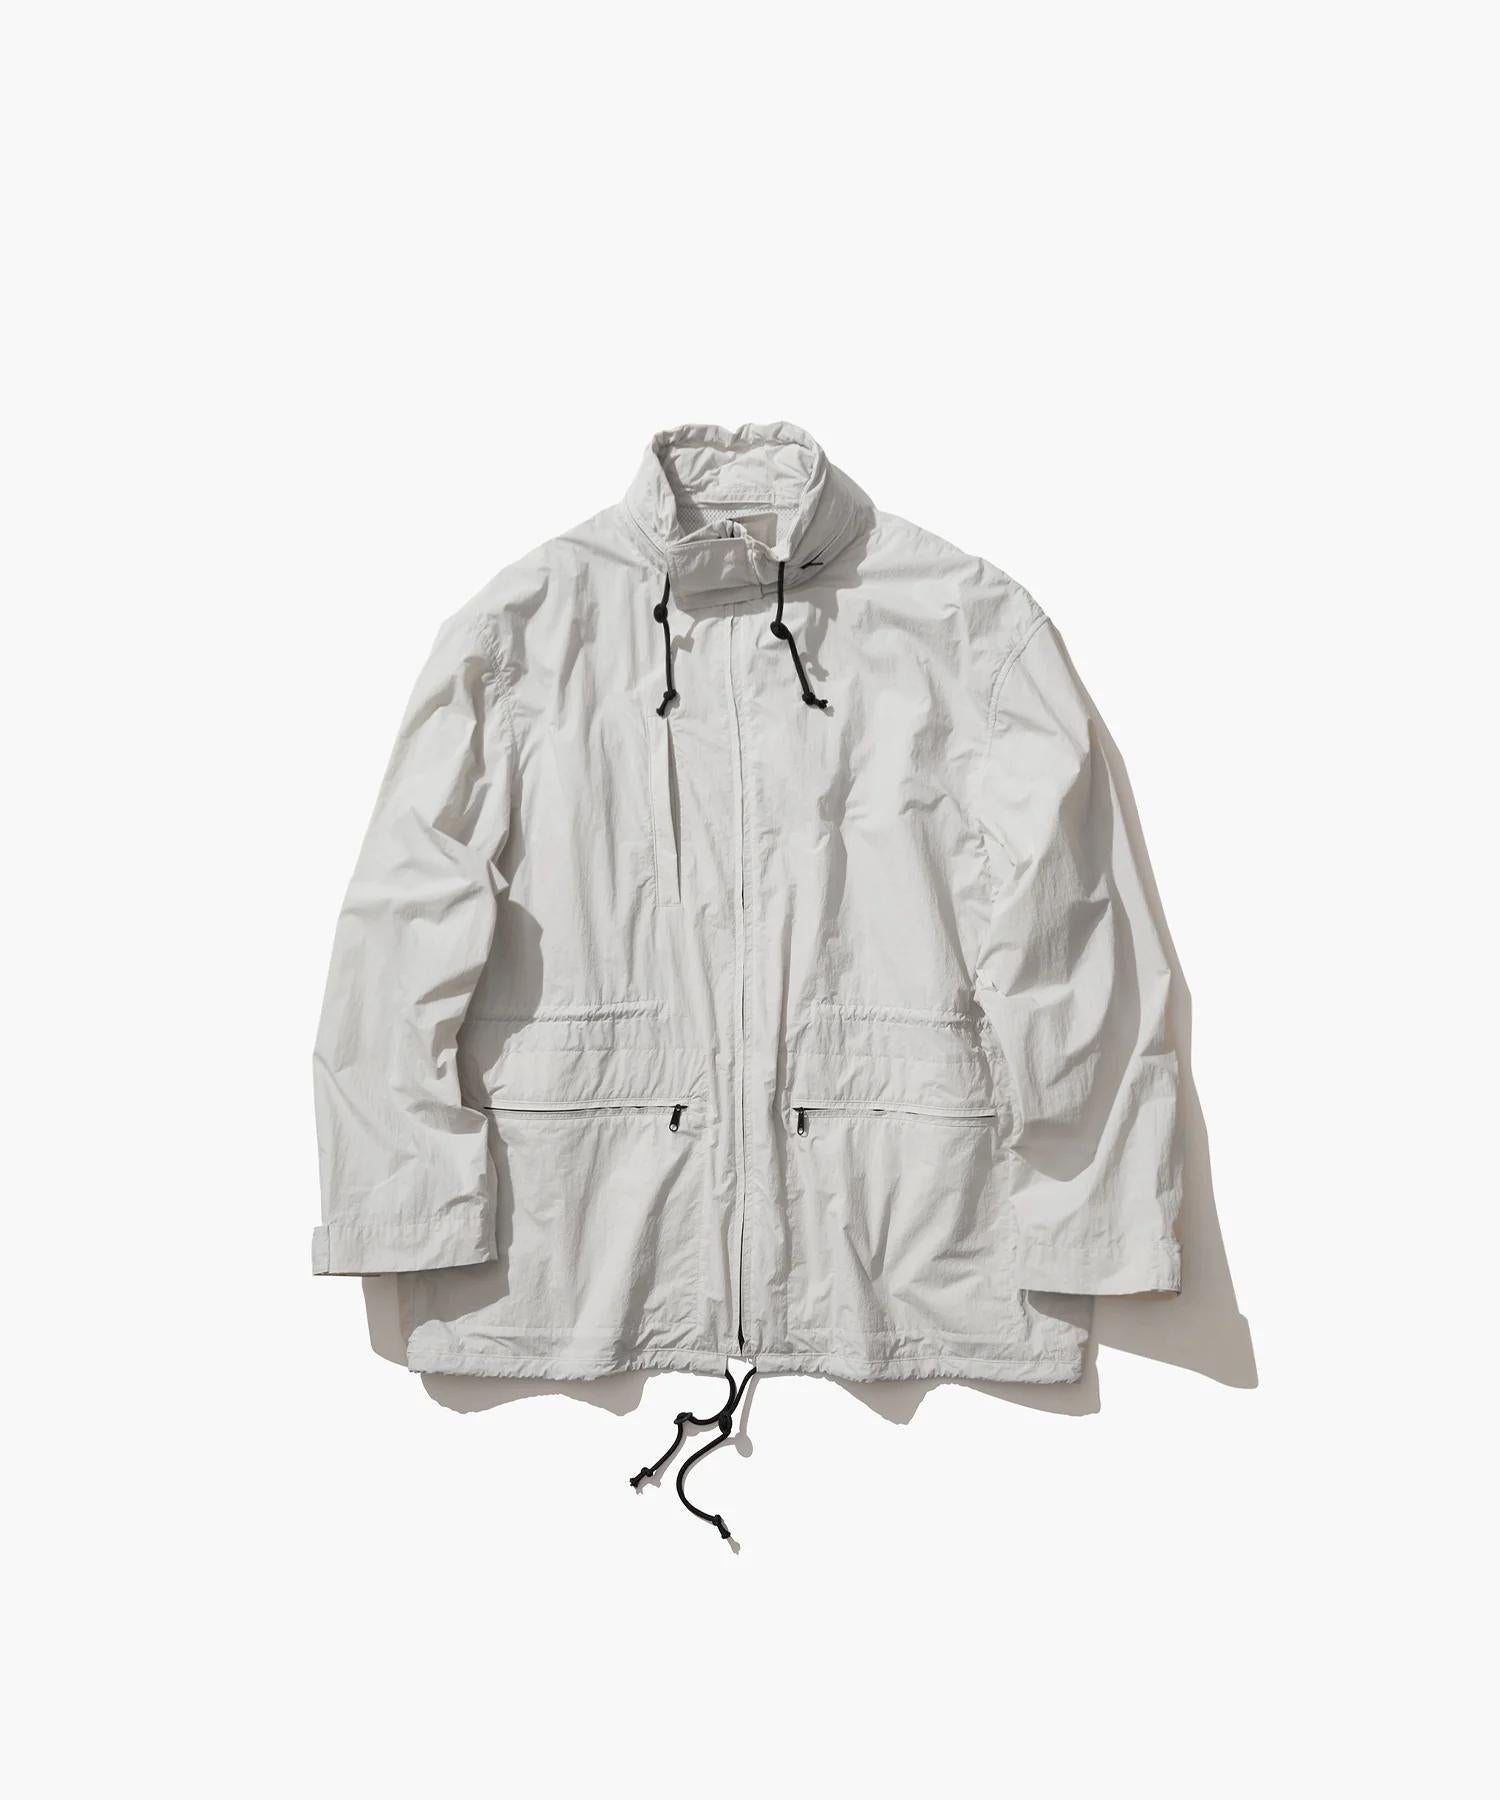 TRAVEL NYLON | PACKABLE JACKET - ATON (エイトン) - outer (アウター